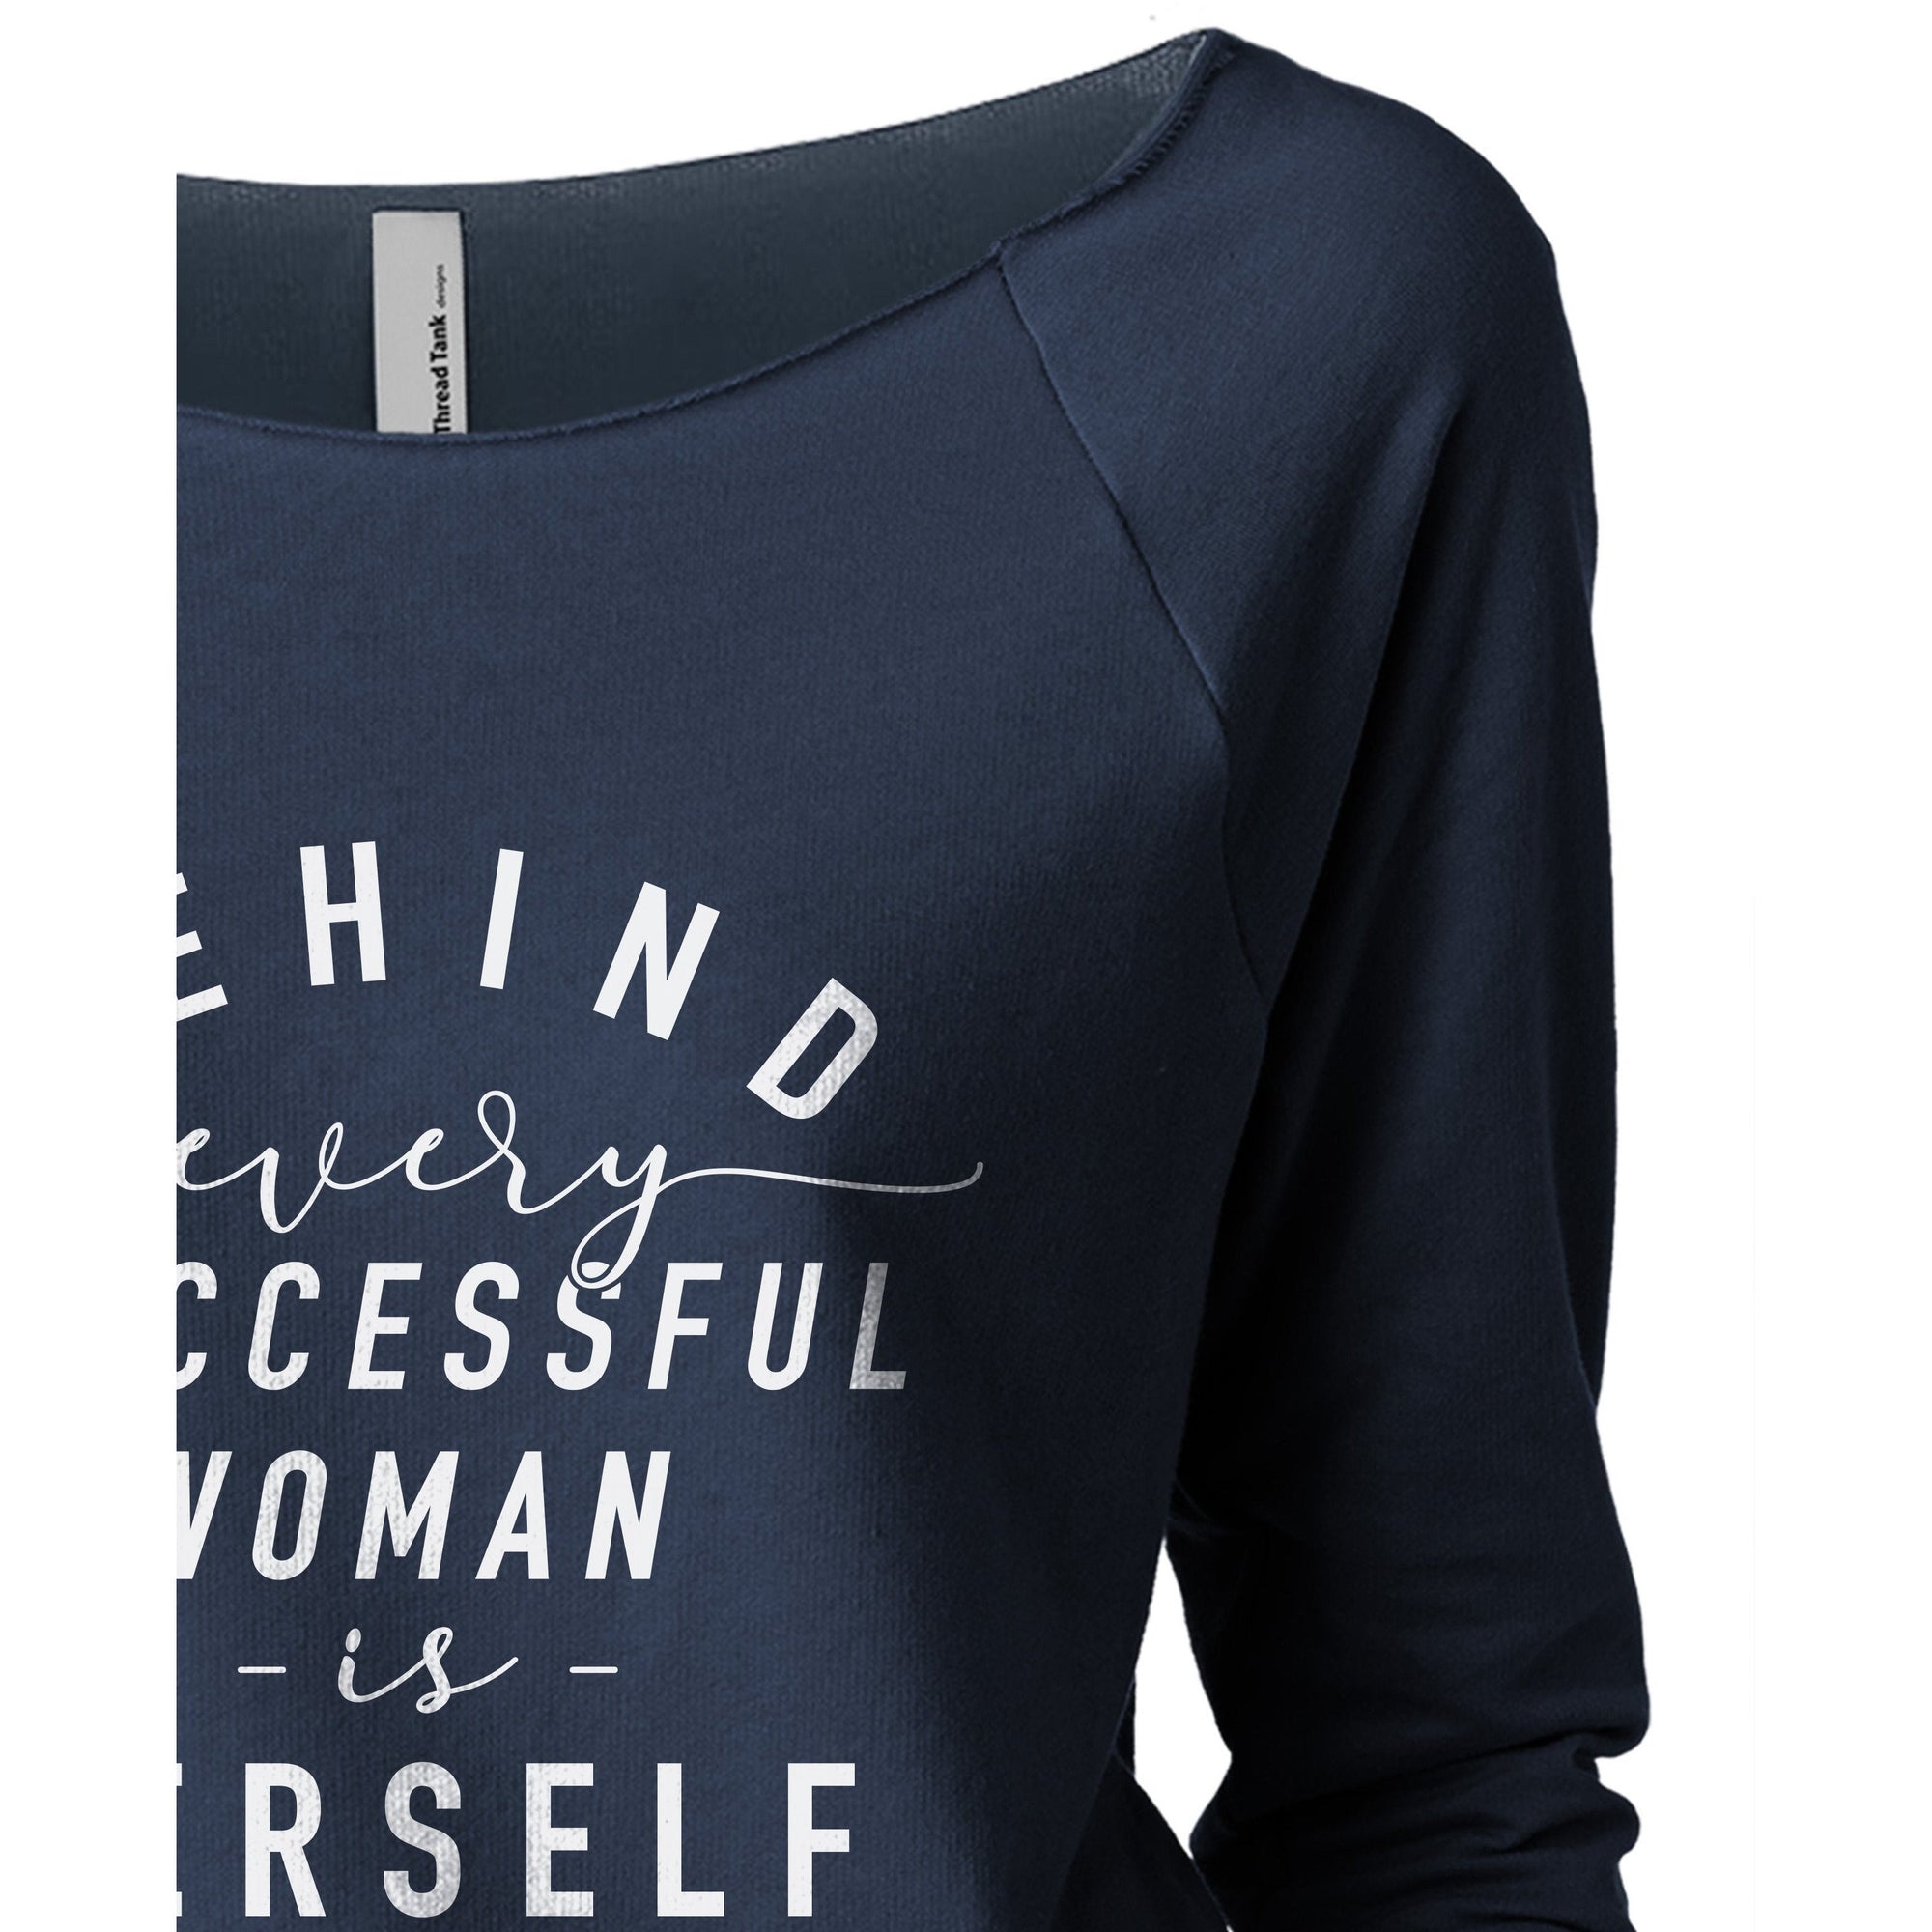 Behind Every Successful Woman Is Herself - Stories You Can Wear